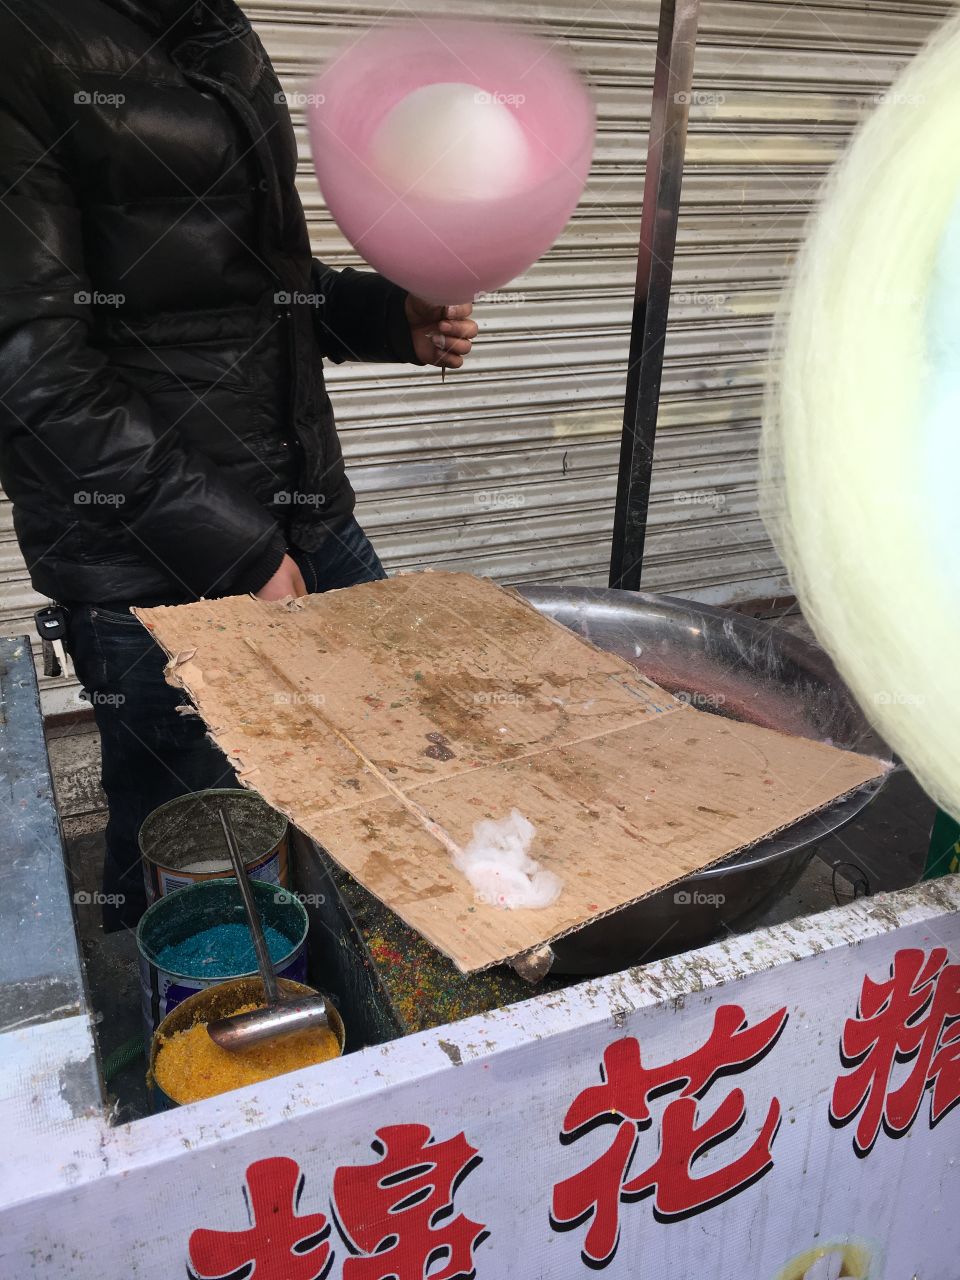 Cotton candy flower making in the Muslim Quarter of Xi'an, China